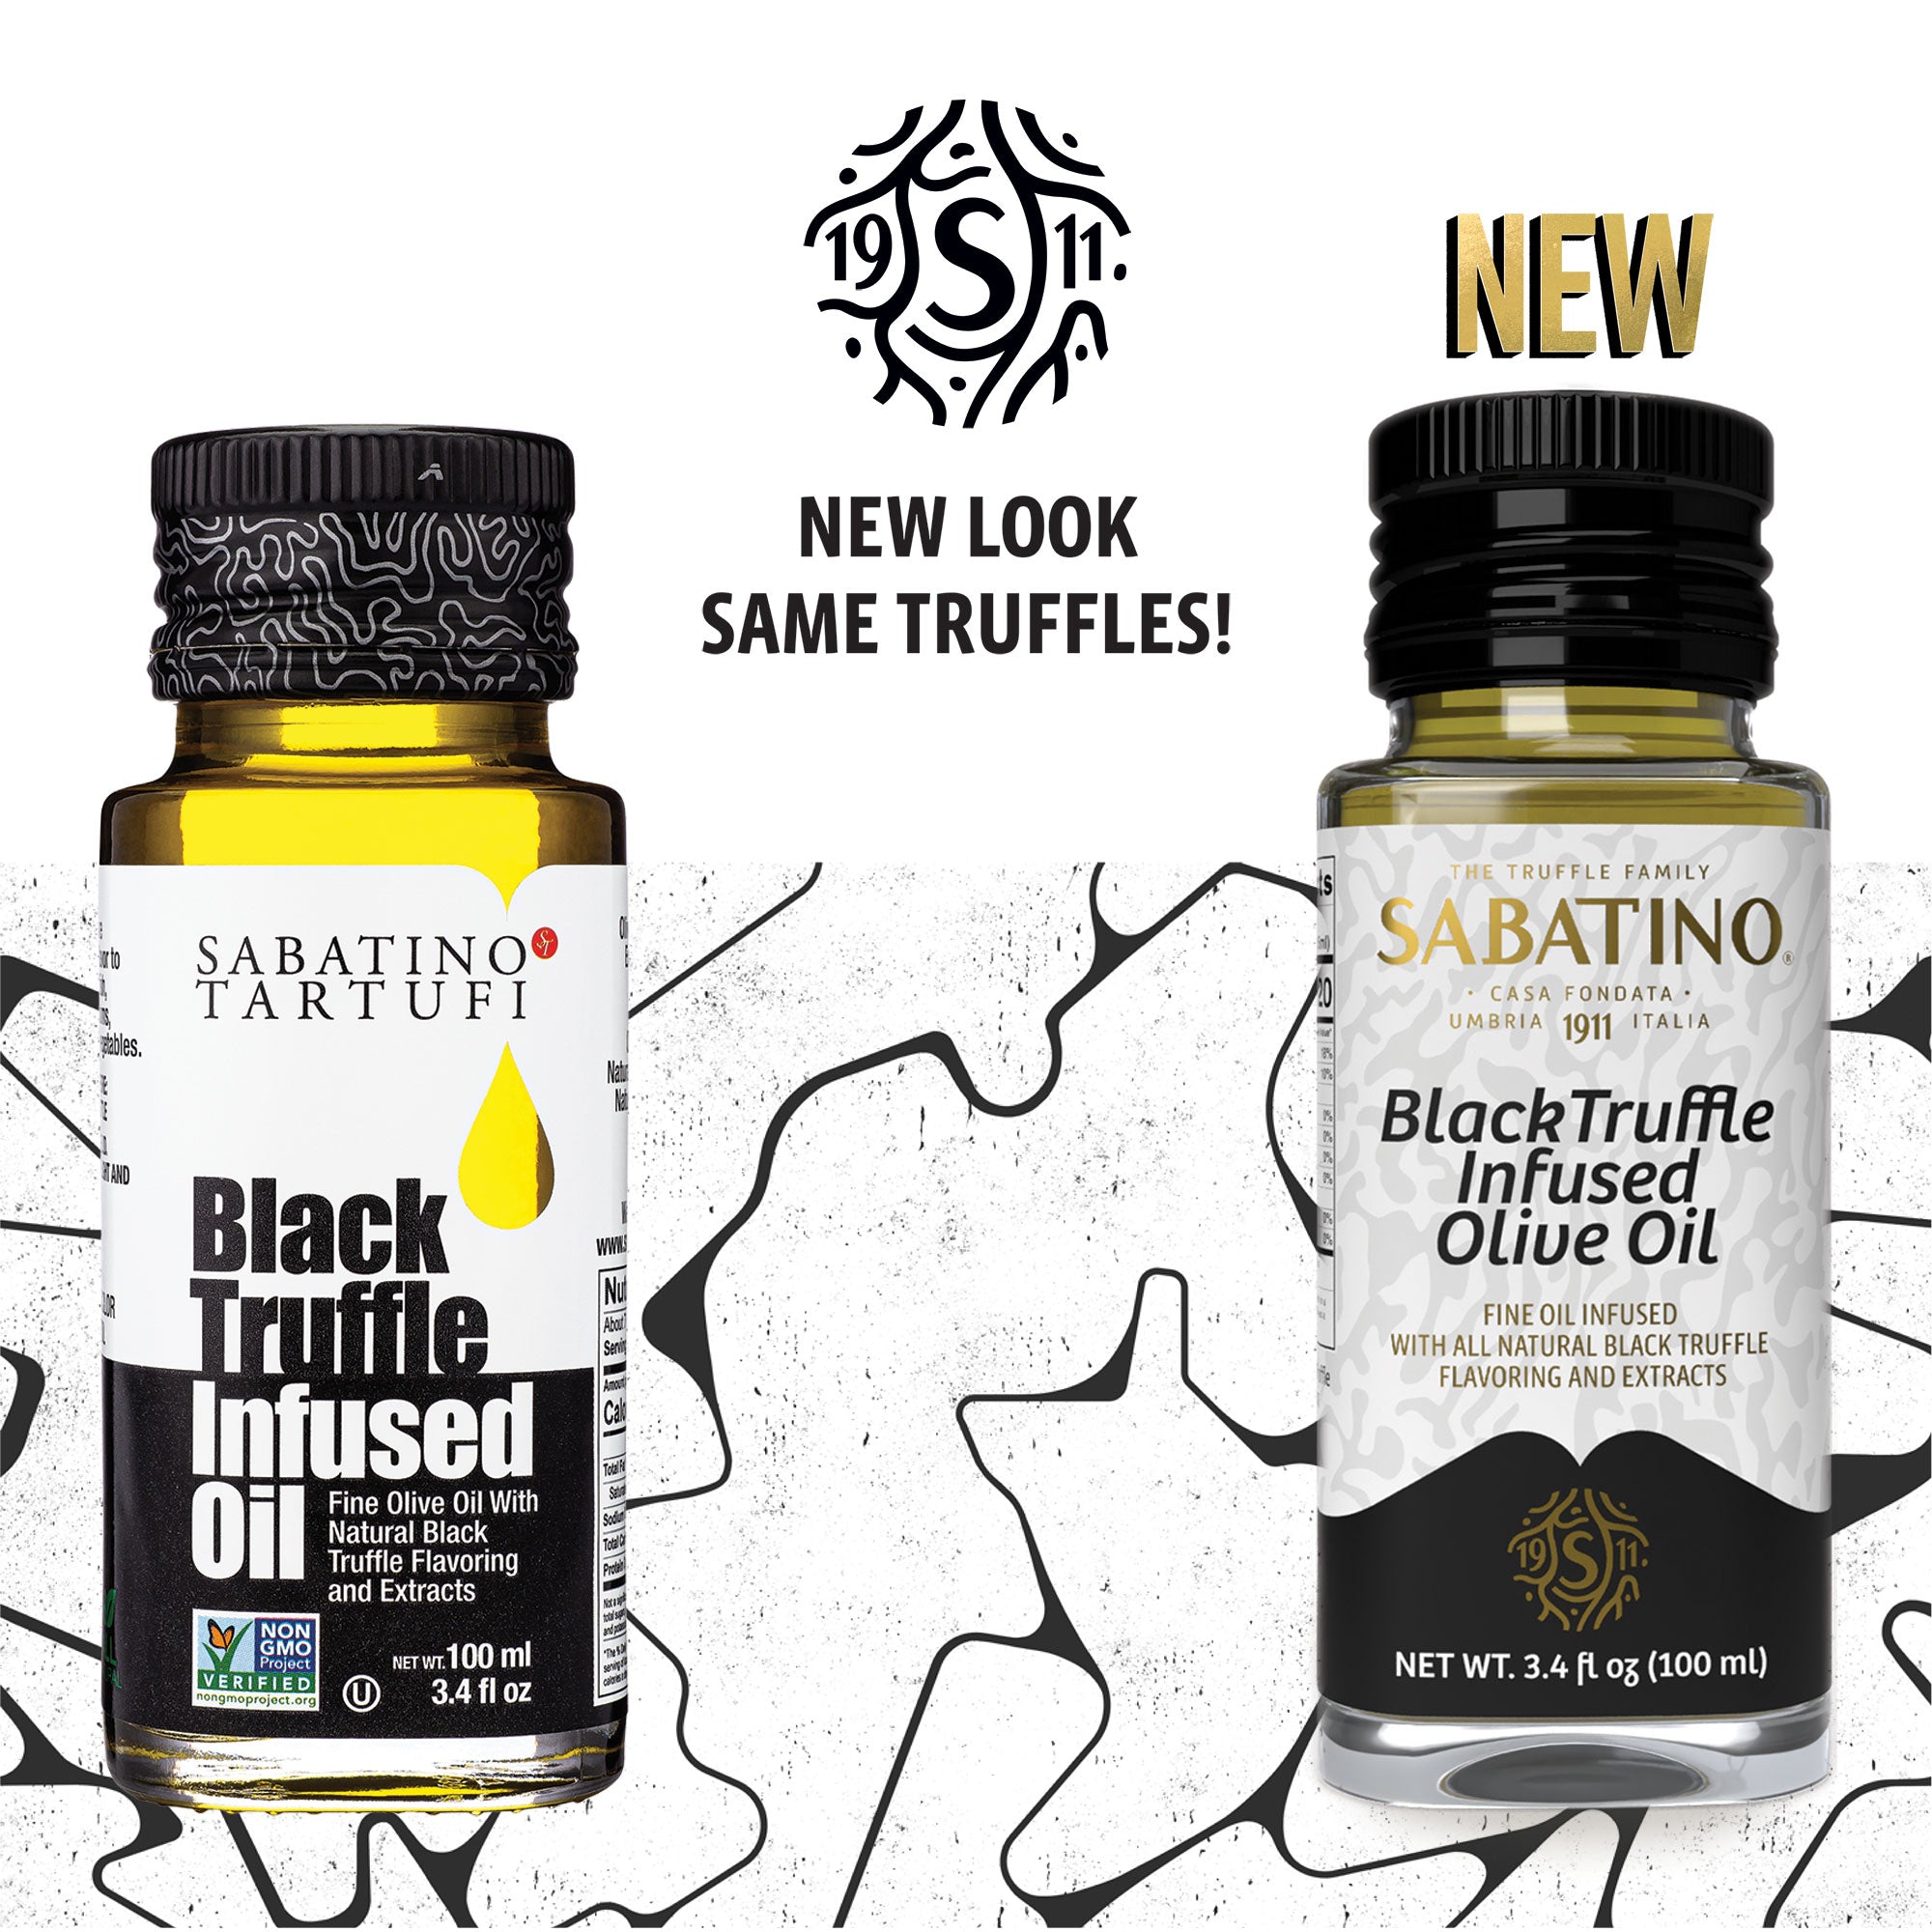 All Natural Black Truffle Infused Oil - 3.4 fl oz